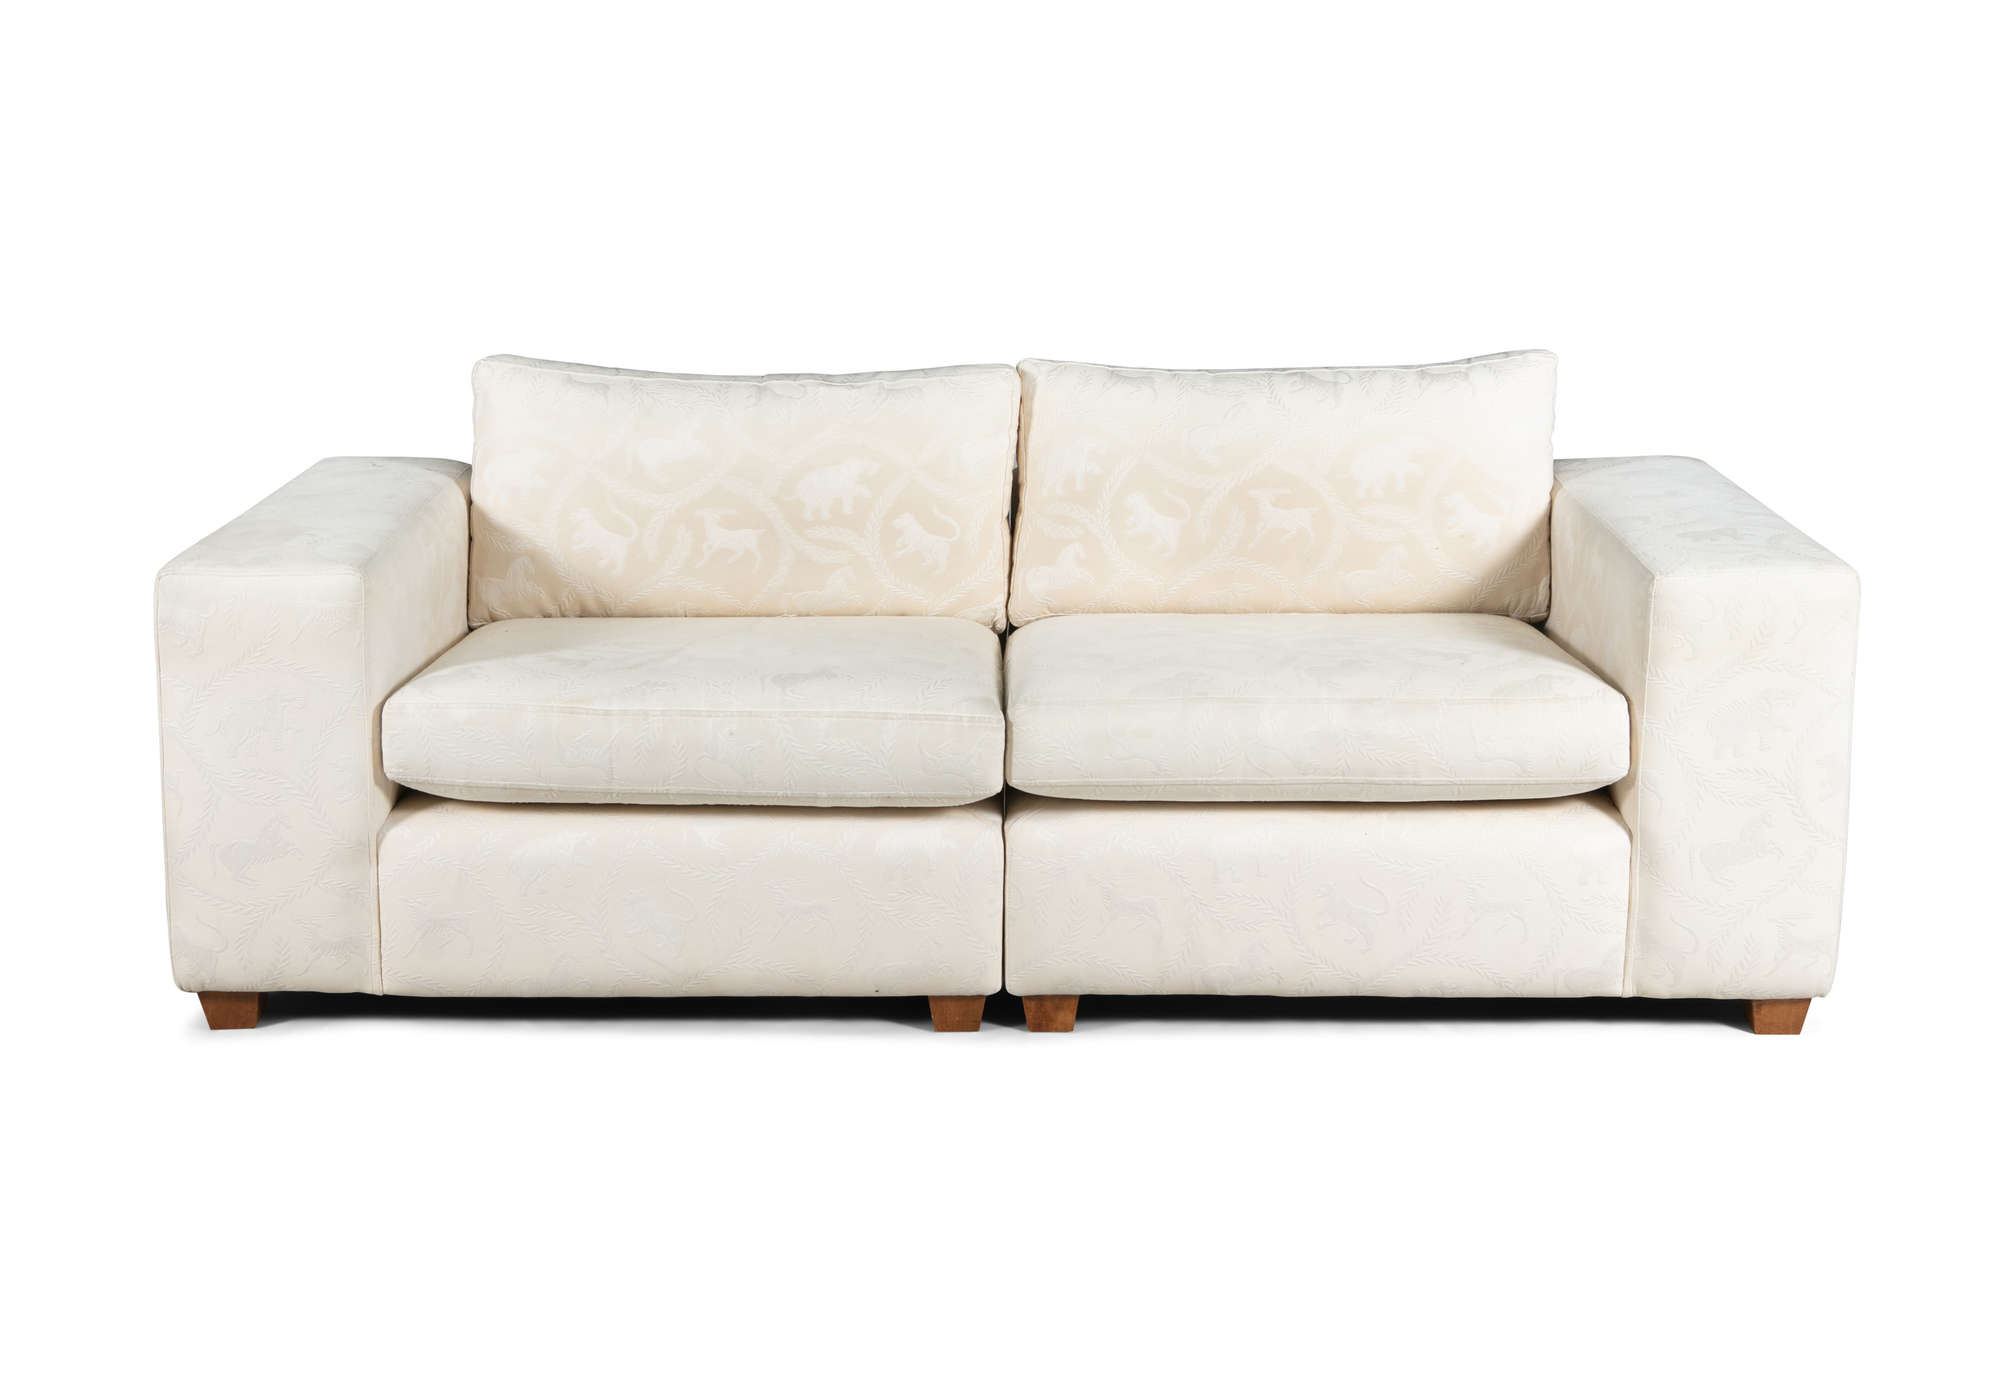 Lot 170 A Large Two Seater Cream Sofa